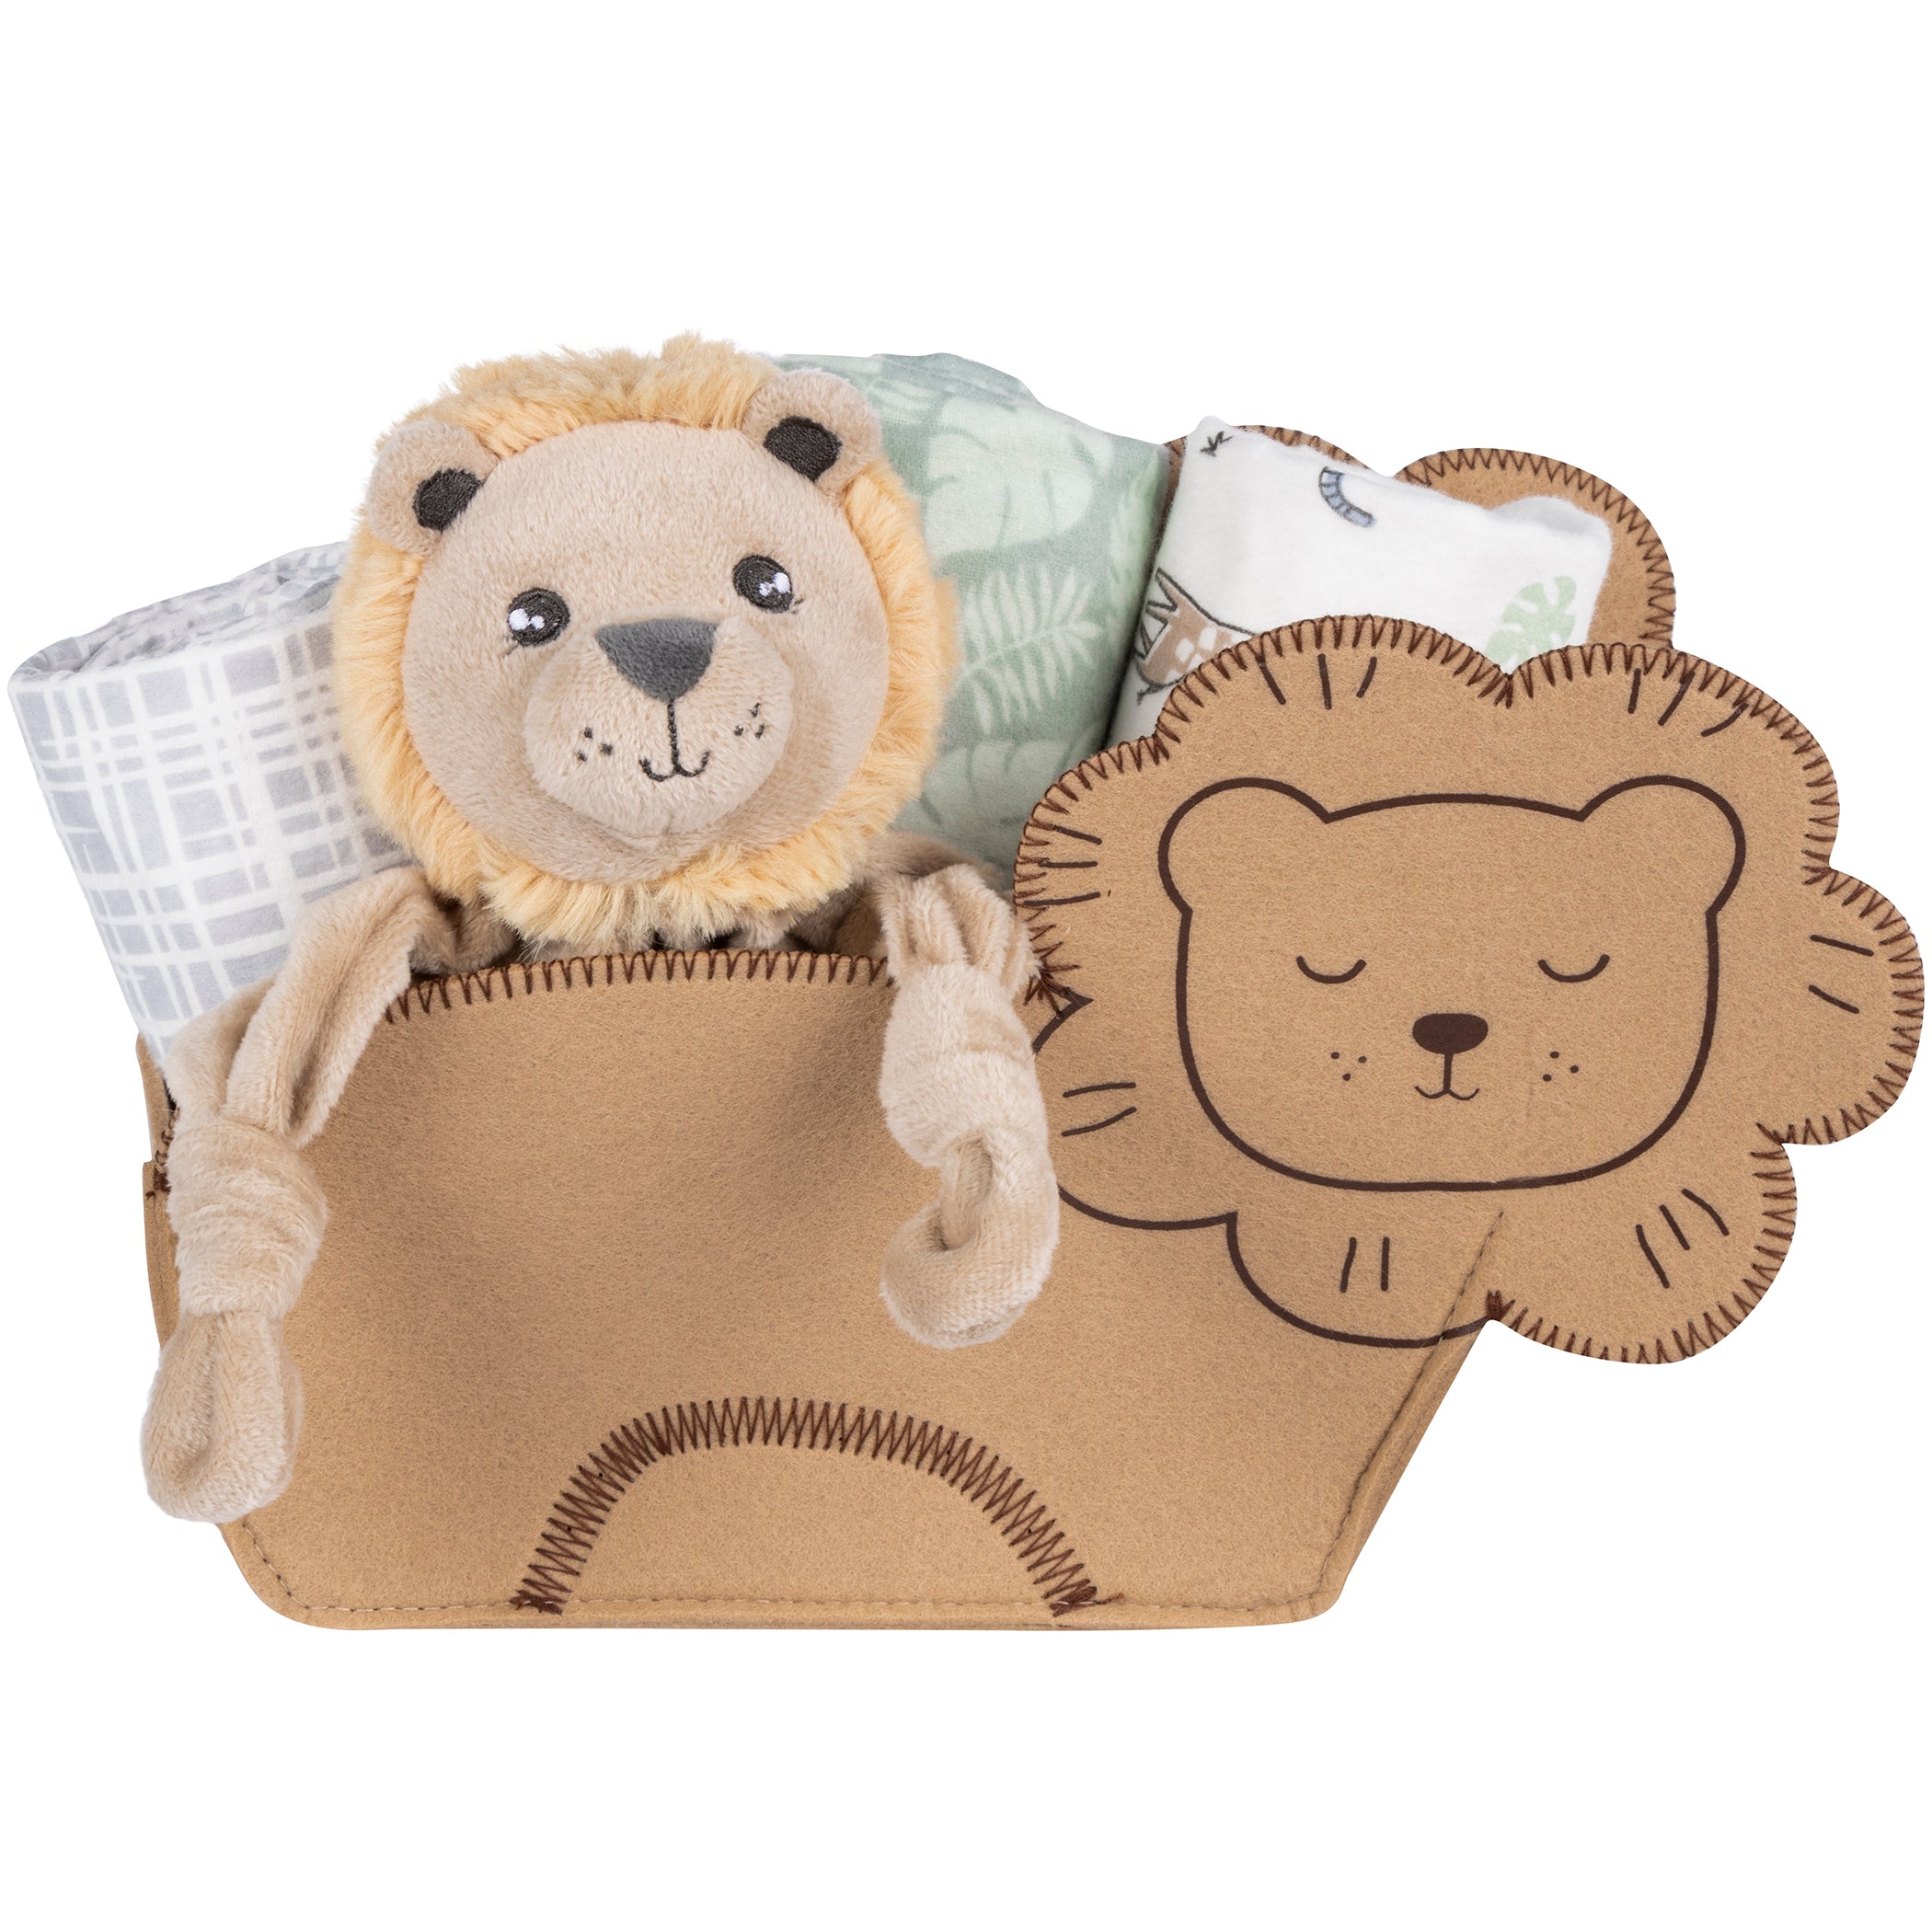 Welcome Baby Lion Shaped 5 Piece Gift Set by My Tiny Moments?